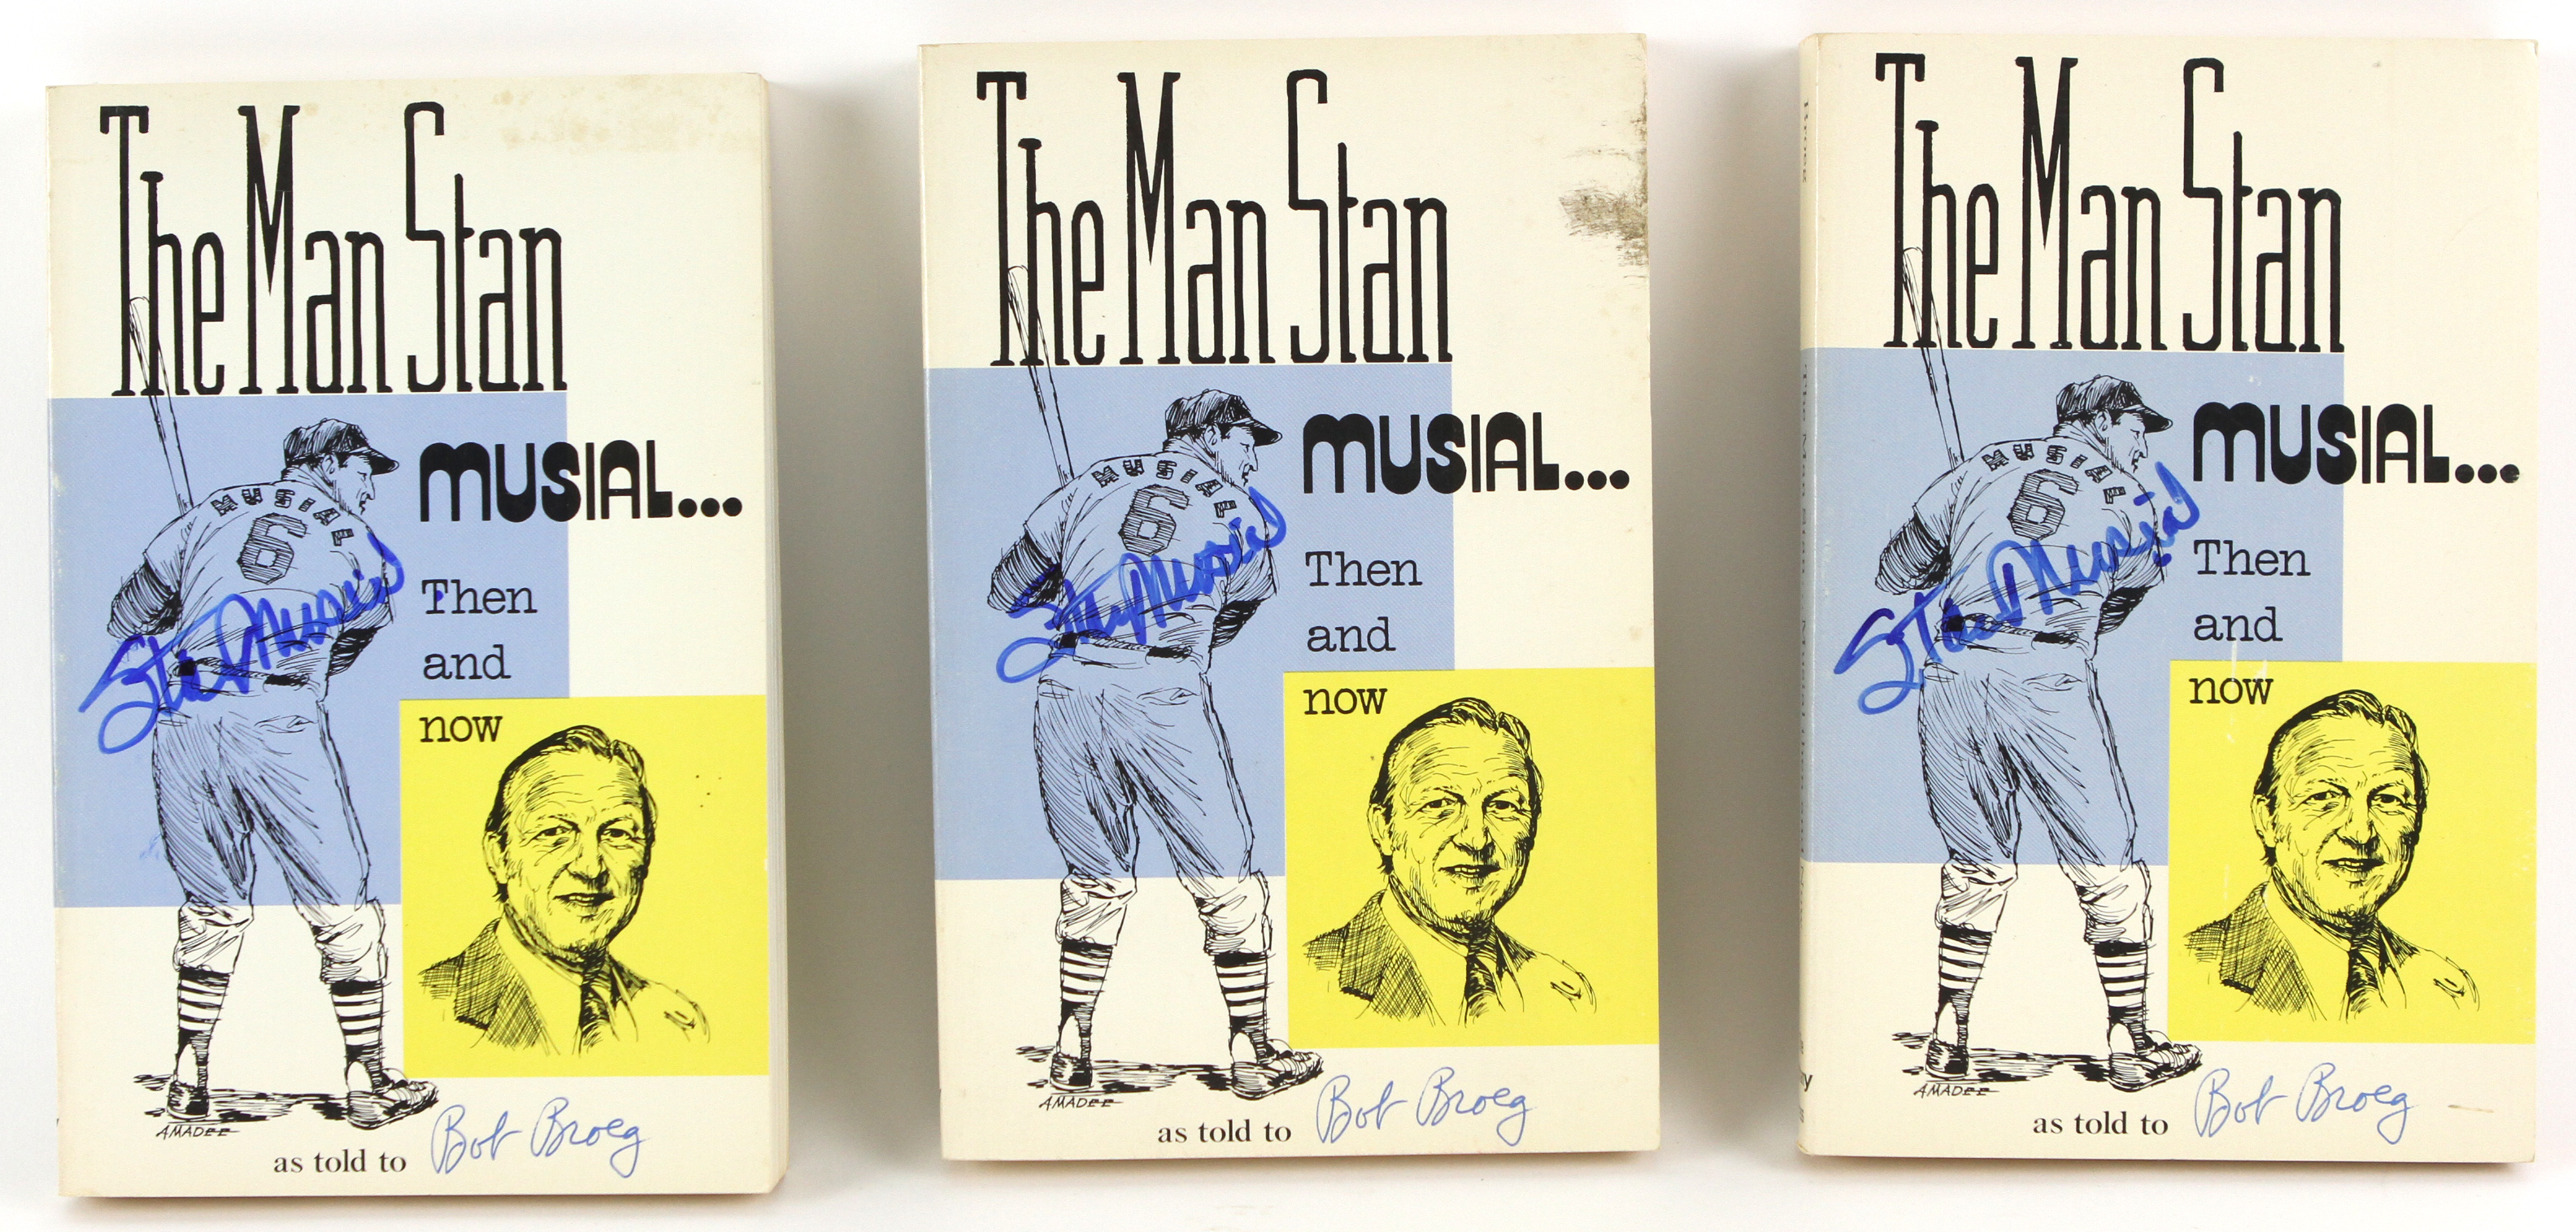 lot-detail-1977-stan-musial-st-louis-cardinals-signed-the-man-stan